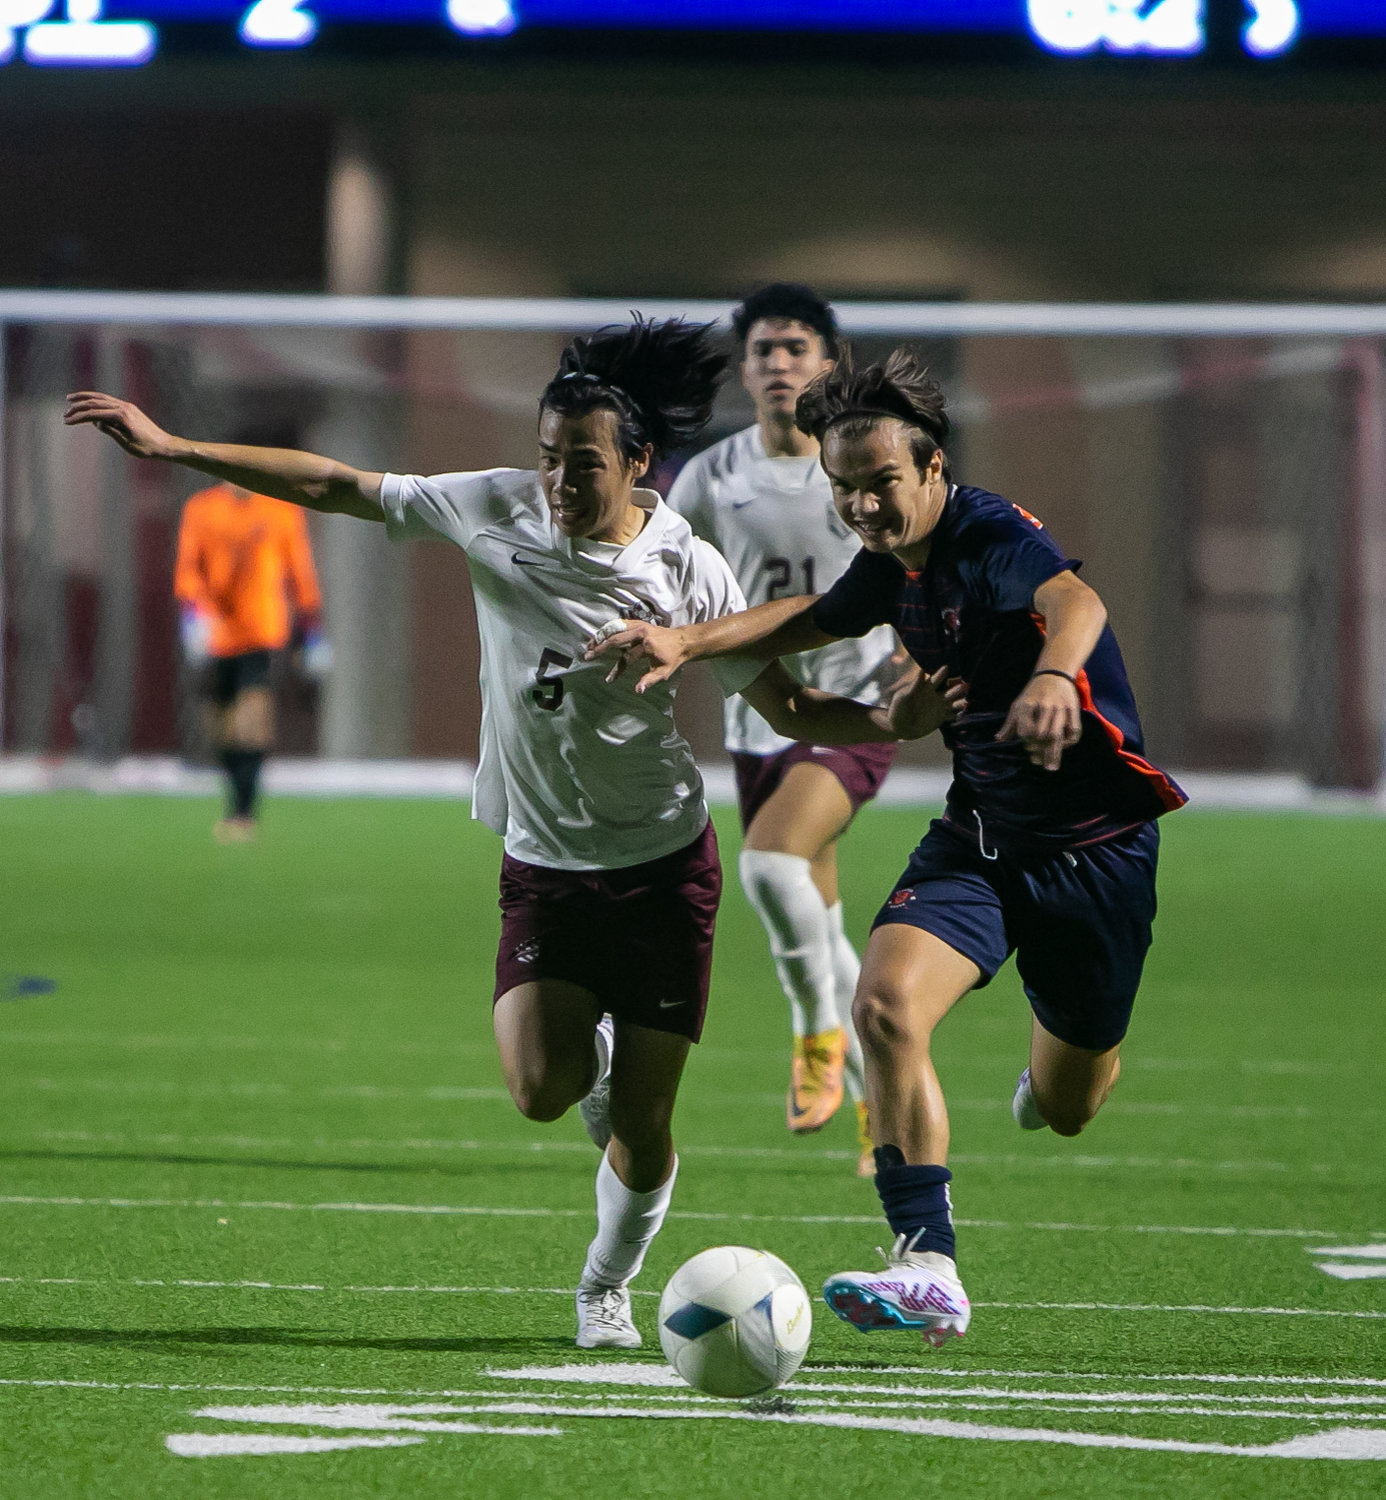 Kortay Koc fights off a defender while dribbling during Friday's Class 6A Regional Quarterfinal game between Seven Lakes and Cinco Ranch at Legacy Stadium.